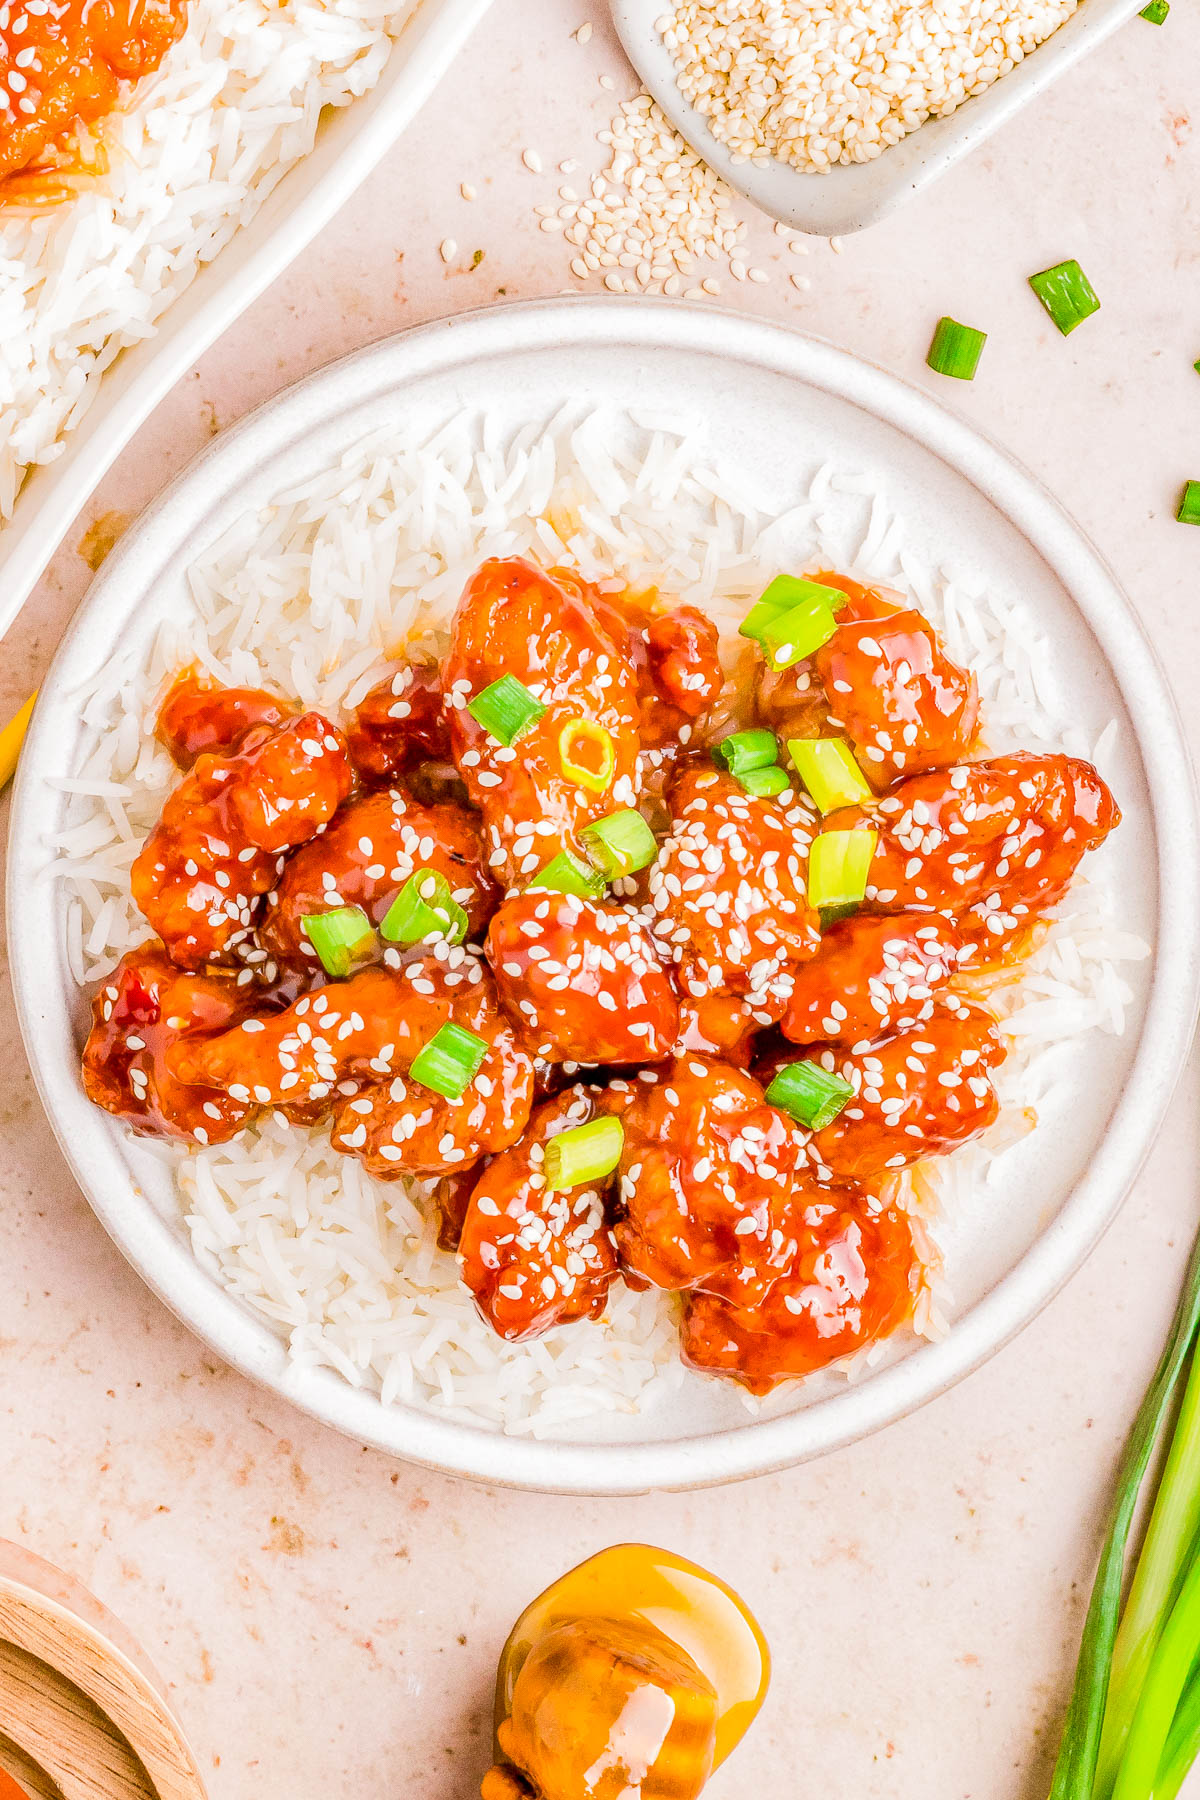 A plate of sesame chicken over white rice garnished with sesame seeds and green onions, with sesame seeds and green onions on the side.